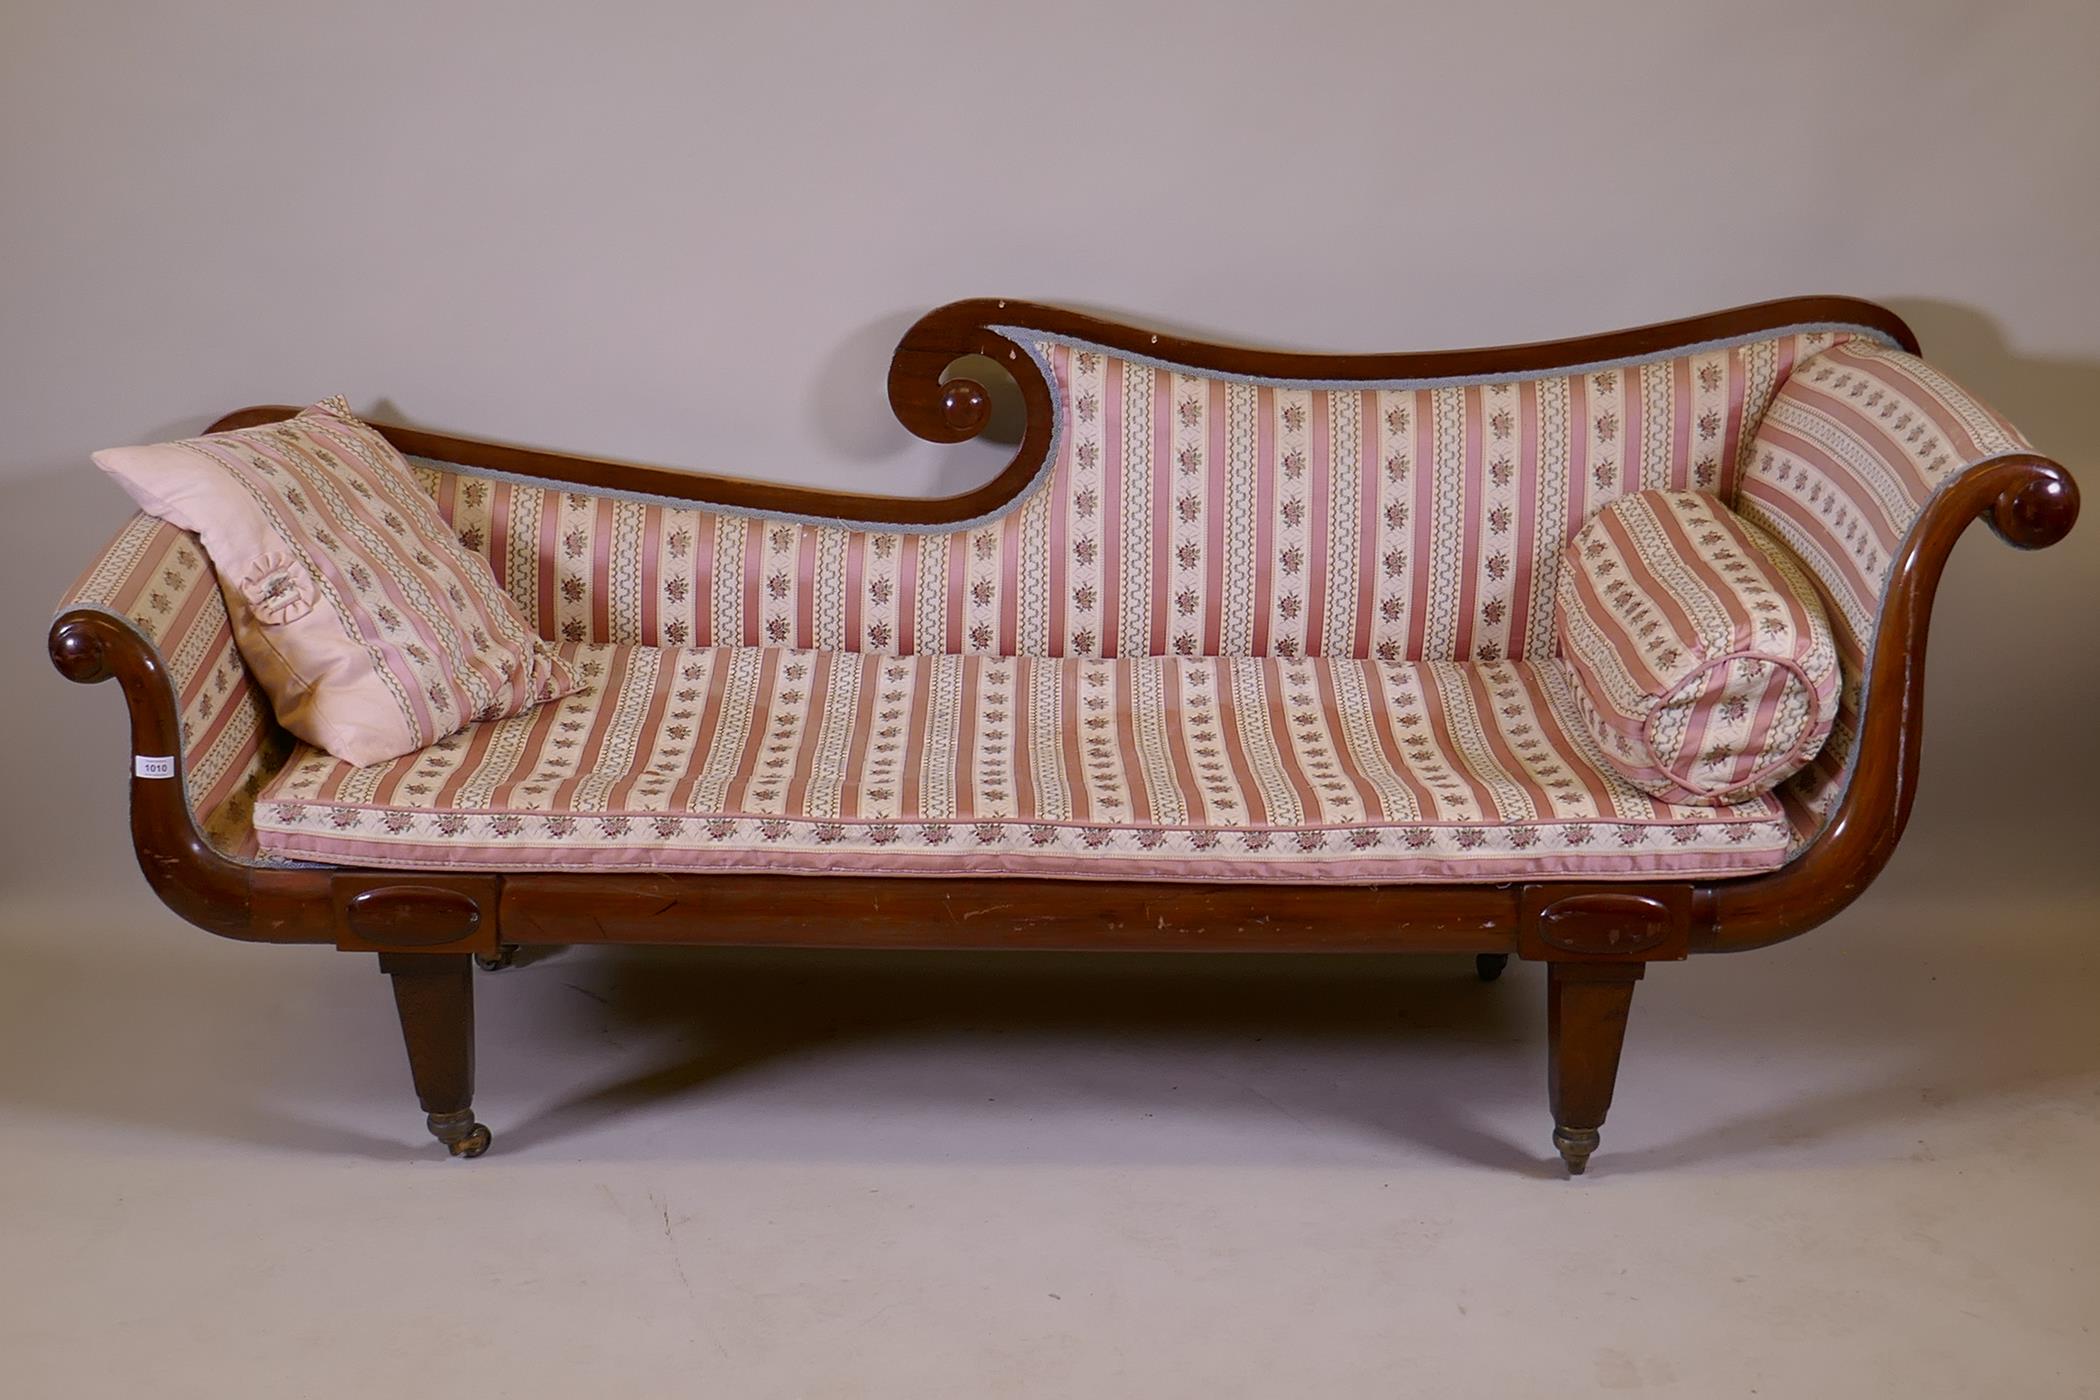 A C19th walnut chaise longue with scrolled ends, raised on tapering supports with brass castors, 200